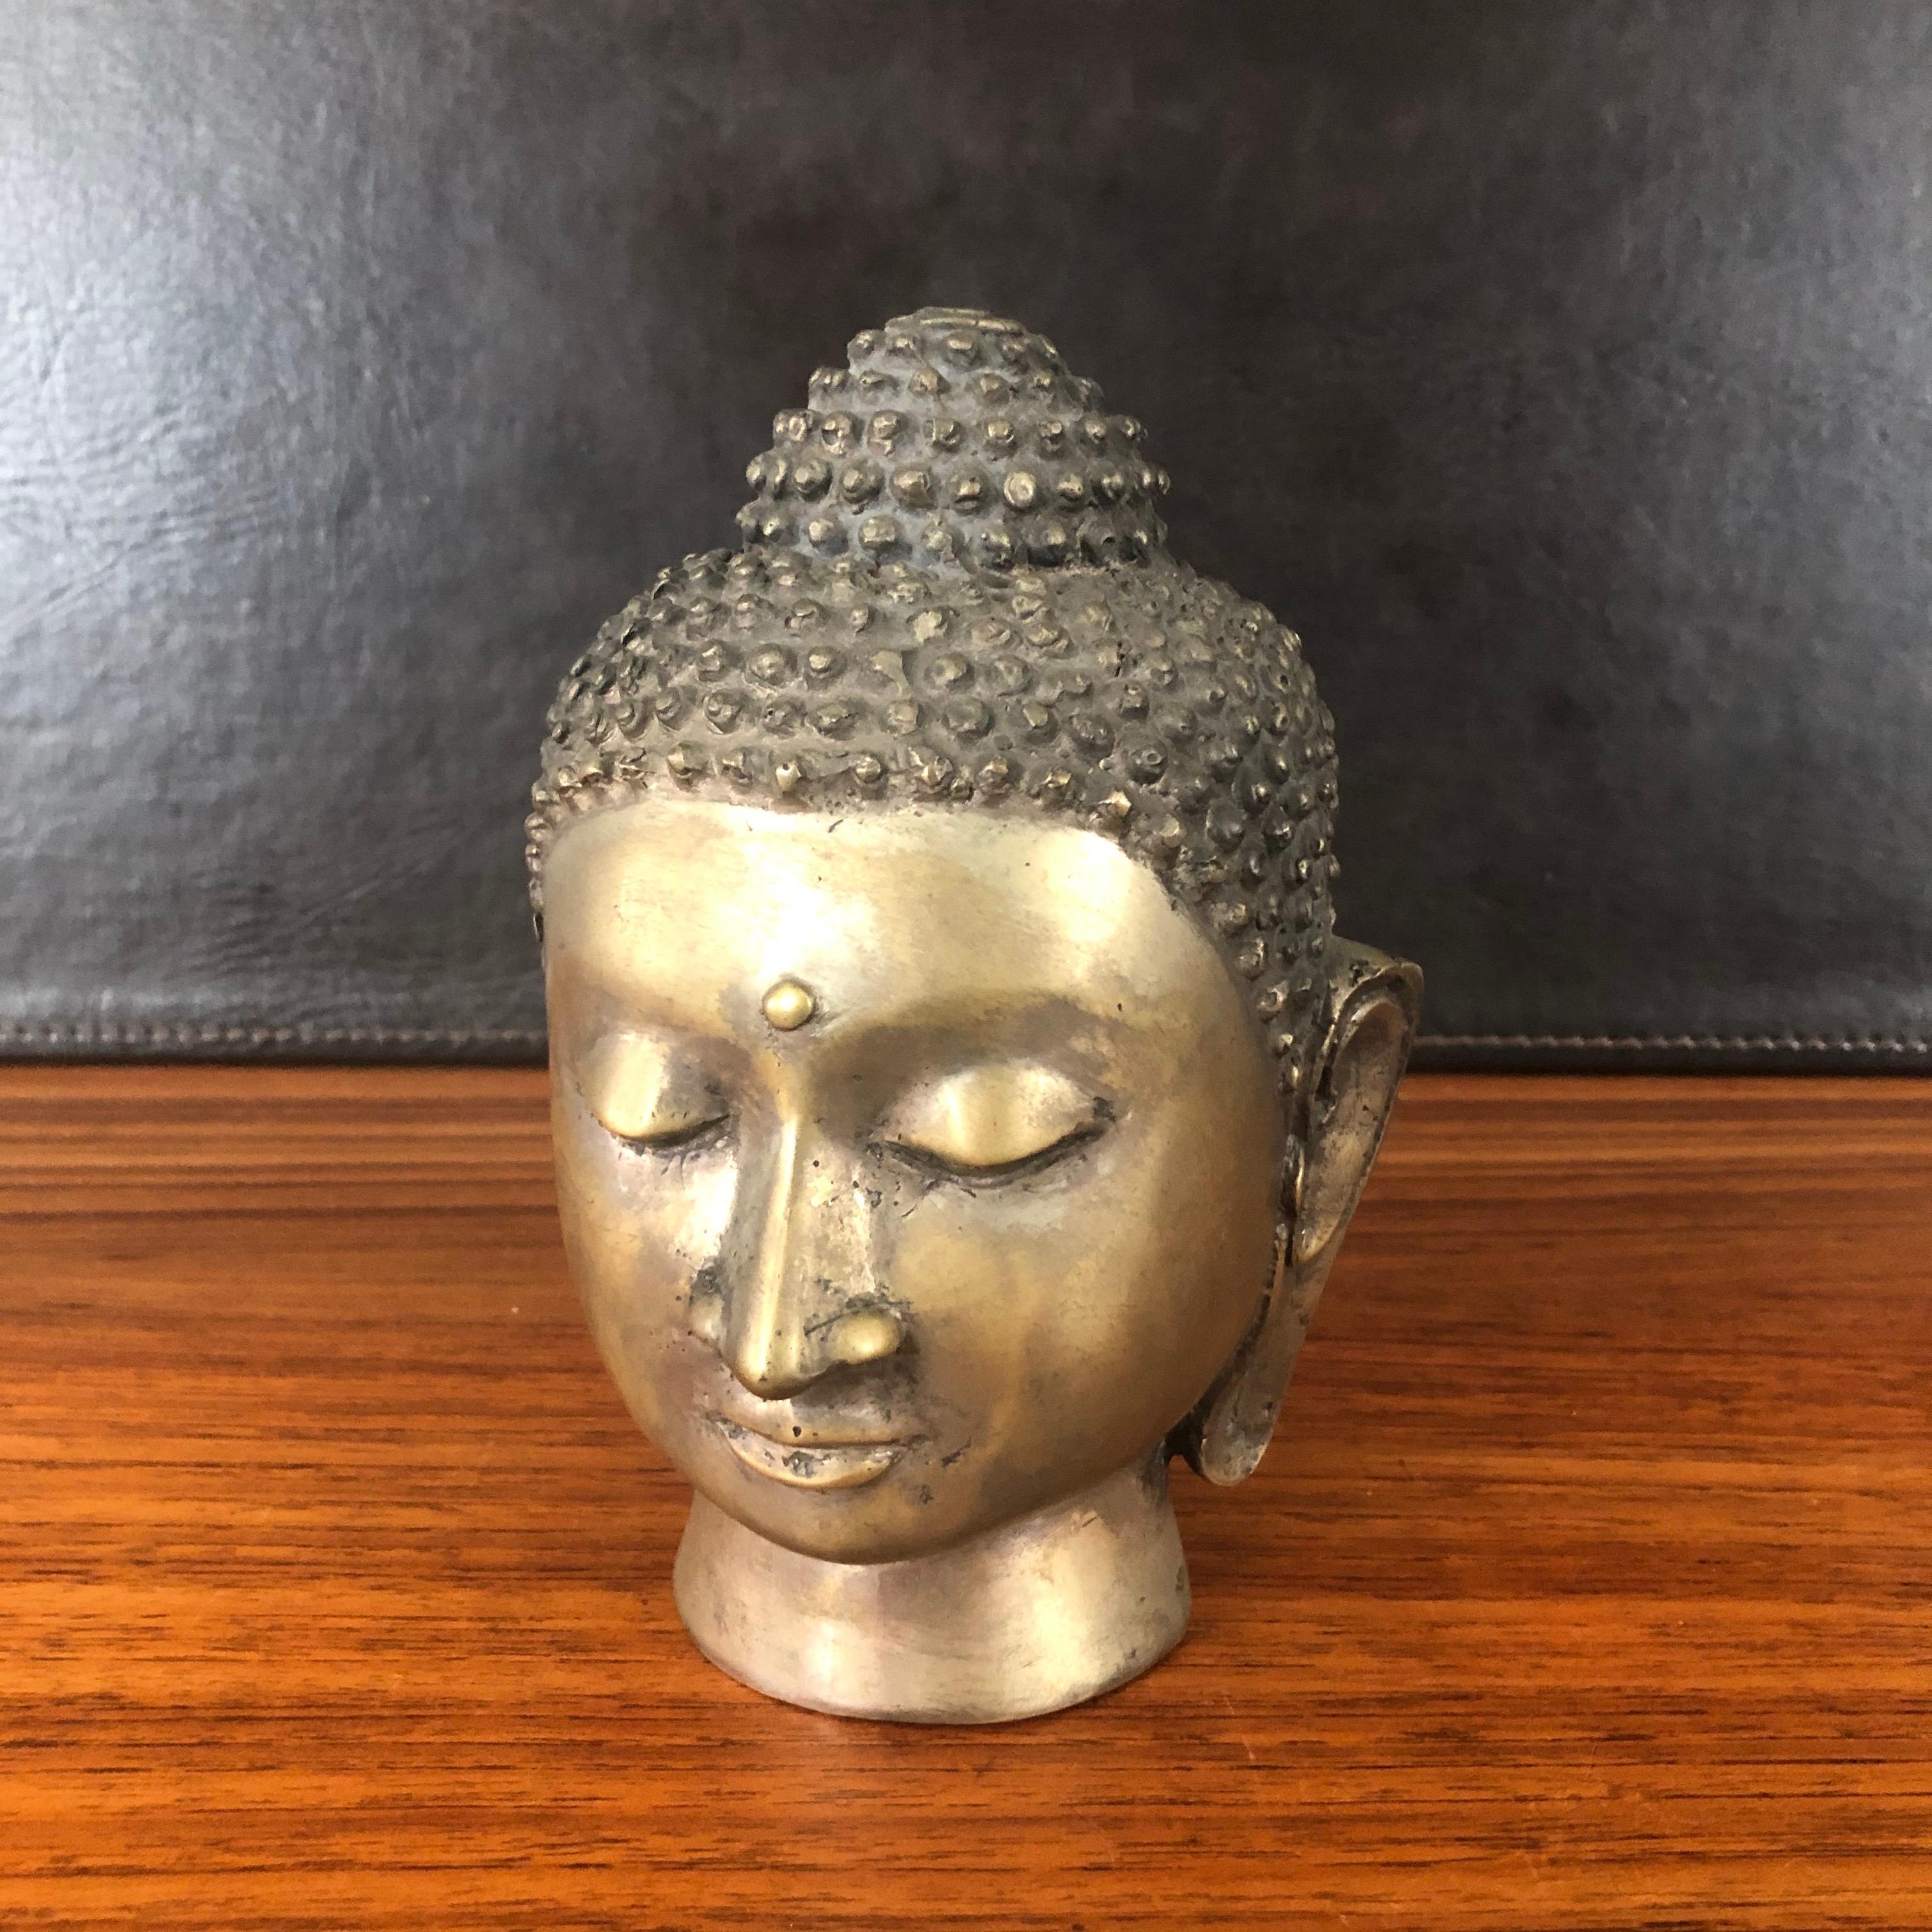 Decorative bronze Buddha head, circa 1970s. The piece is in very good vintage condition and measures: 5